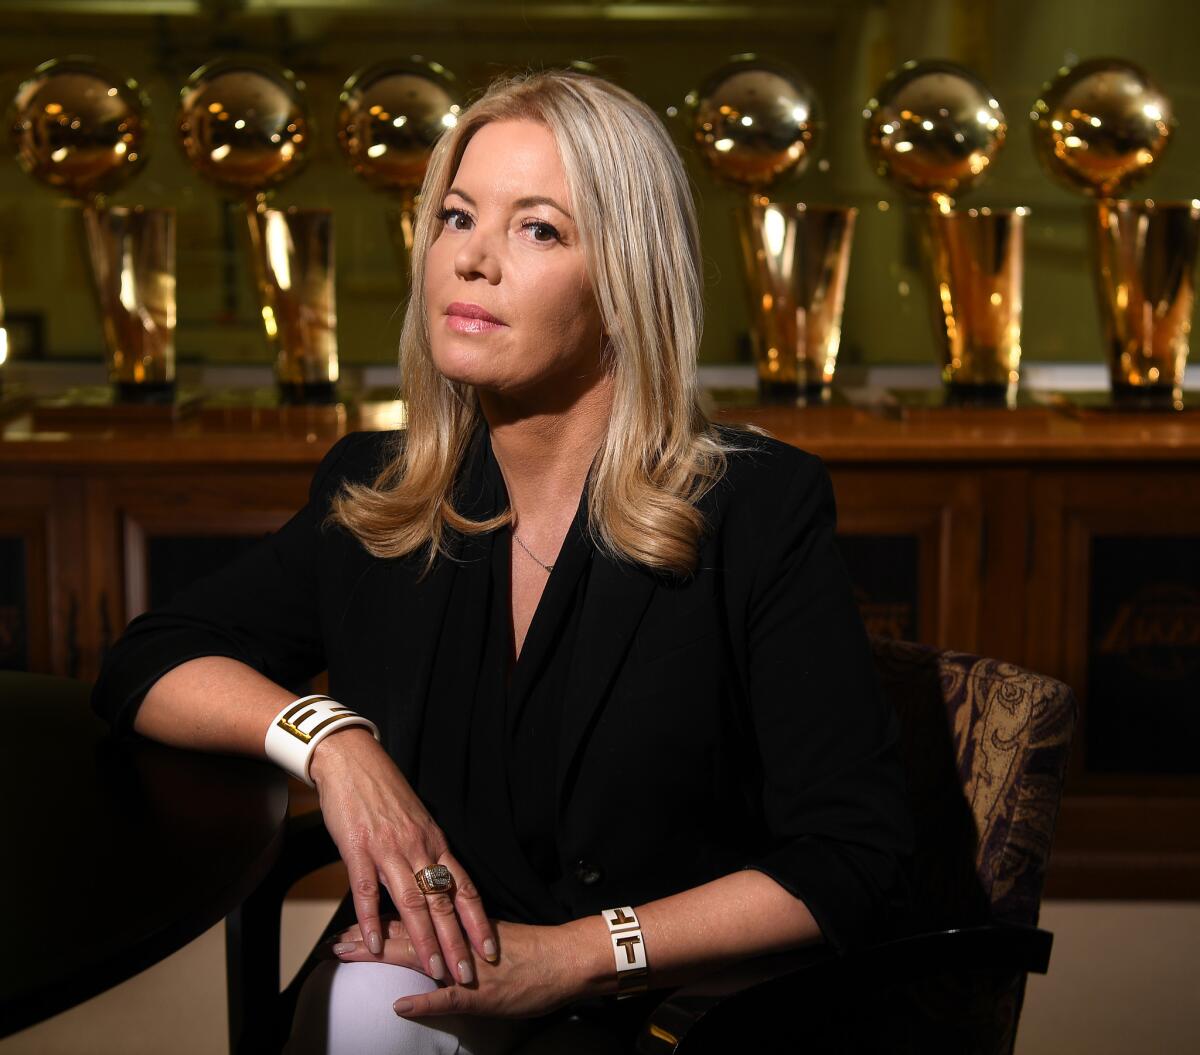 Jeannie Buss, President of the Los Angeles Lakers, sits next to champioship trophies at her office in El Segundo.